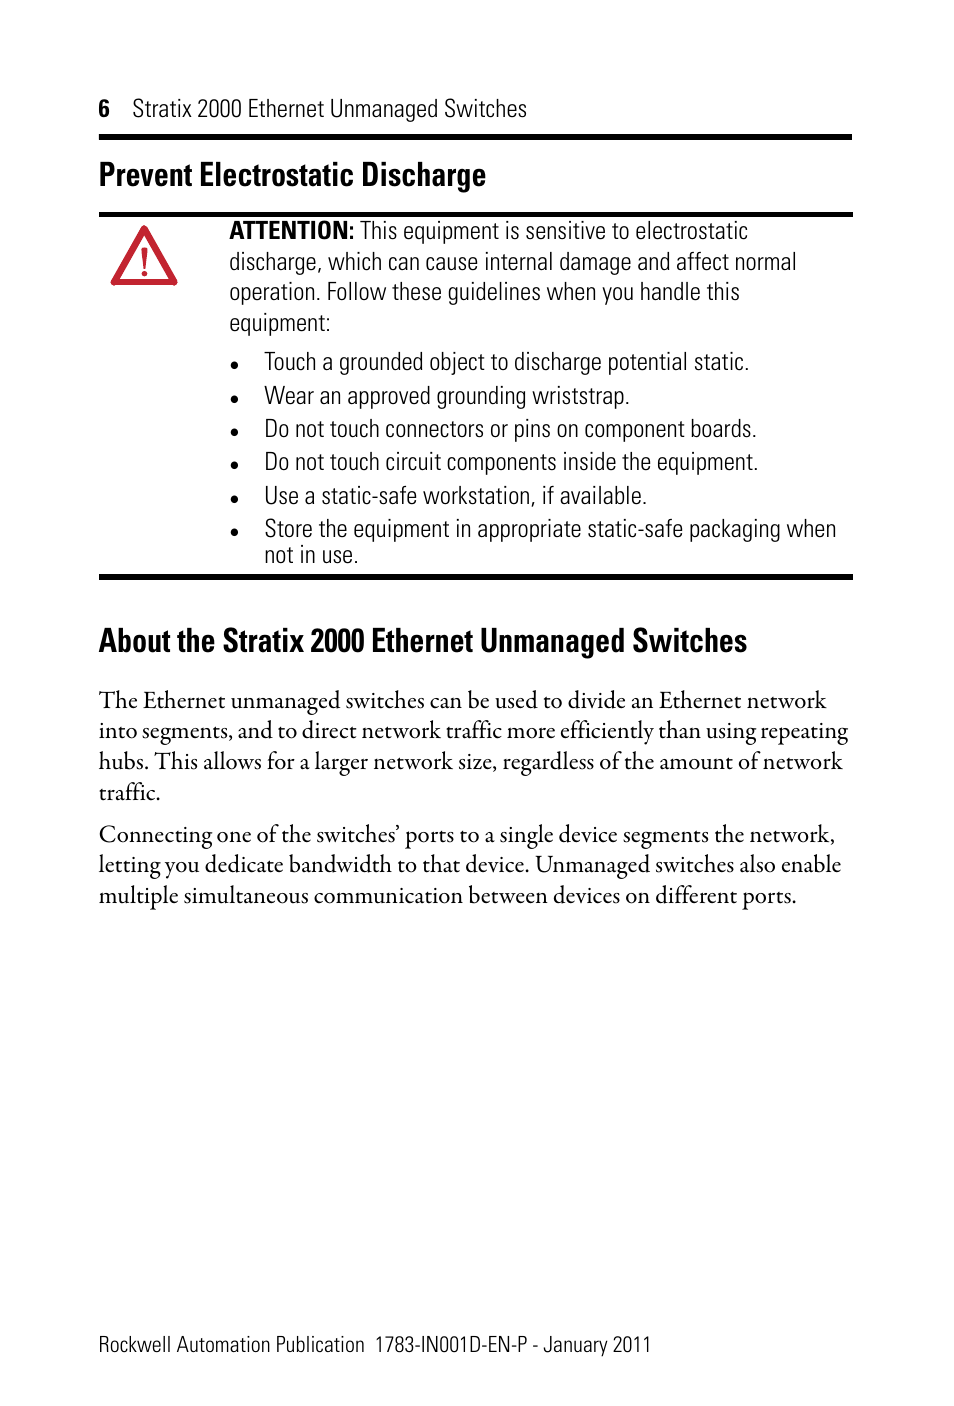 Prevent electrostatic discharge, About the stratix 2000 ethernet unmanaged switches | Rockwell Automation 1783-US08T Stratix 2000 Ethernet Unmanaged Switch Installation Instructions User Manual | Page 6 / 28